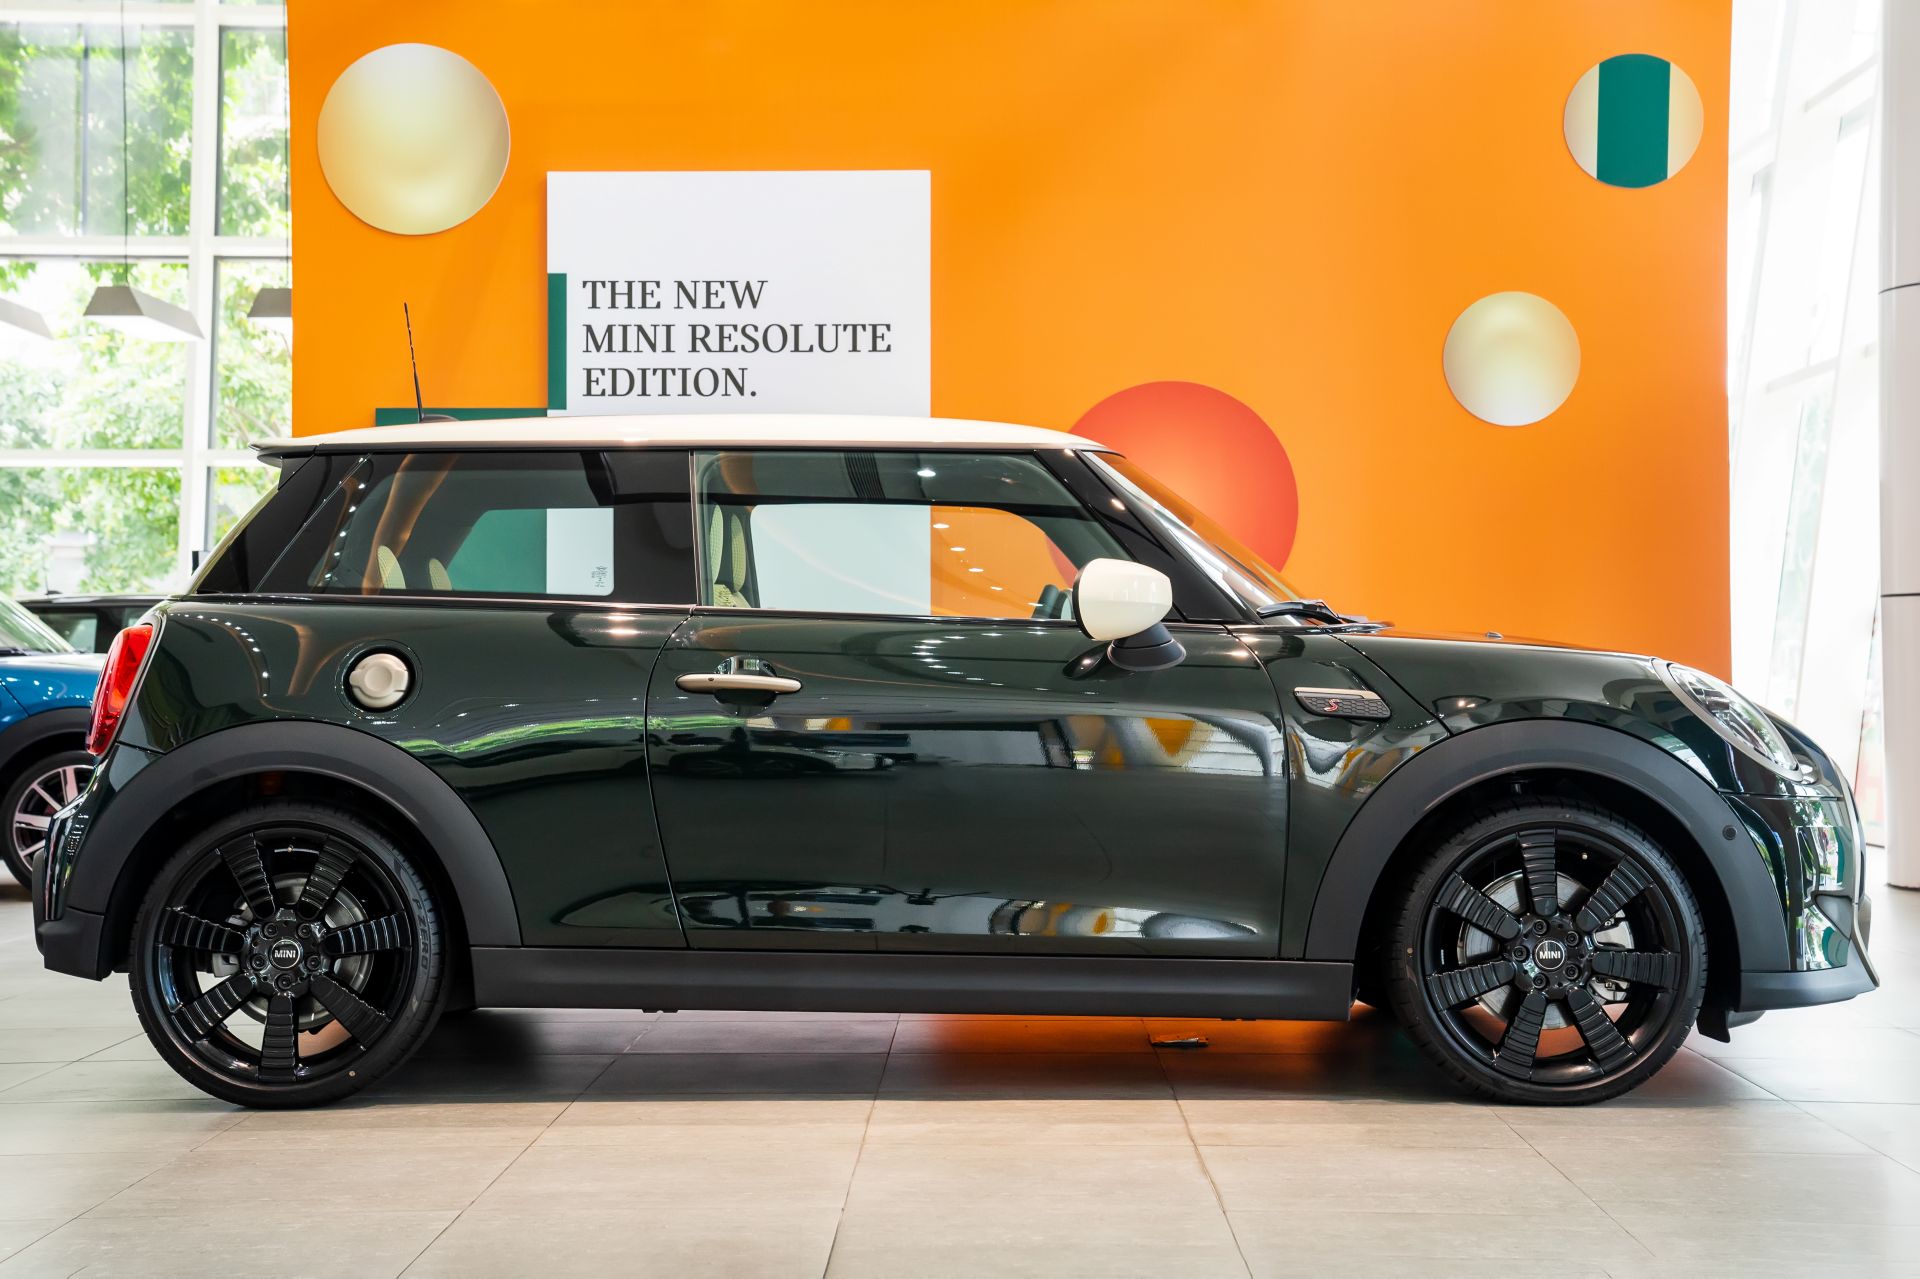 What's so special about MINI Cooper S Resolute Edition at nearly 2.3 billion VND?  - Photo 2.